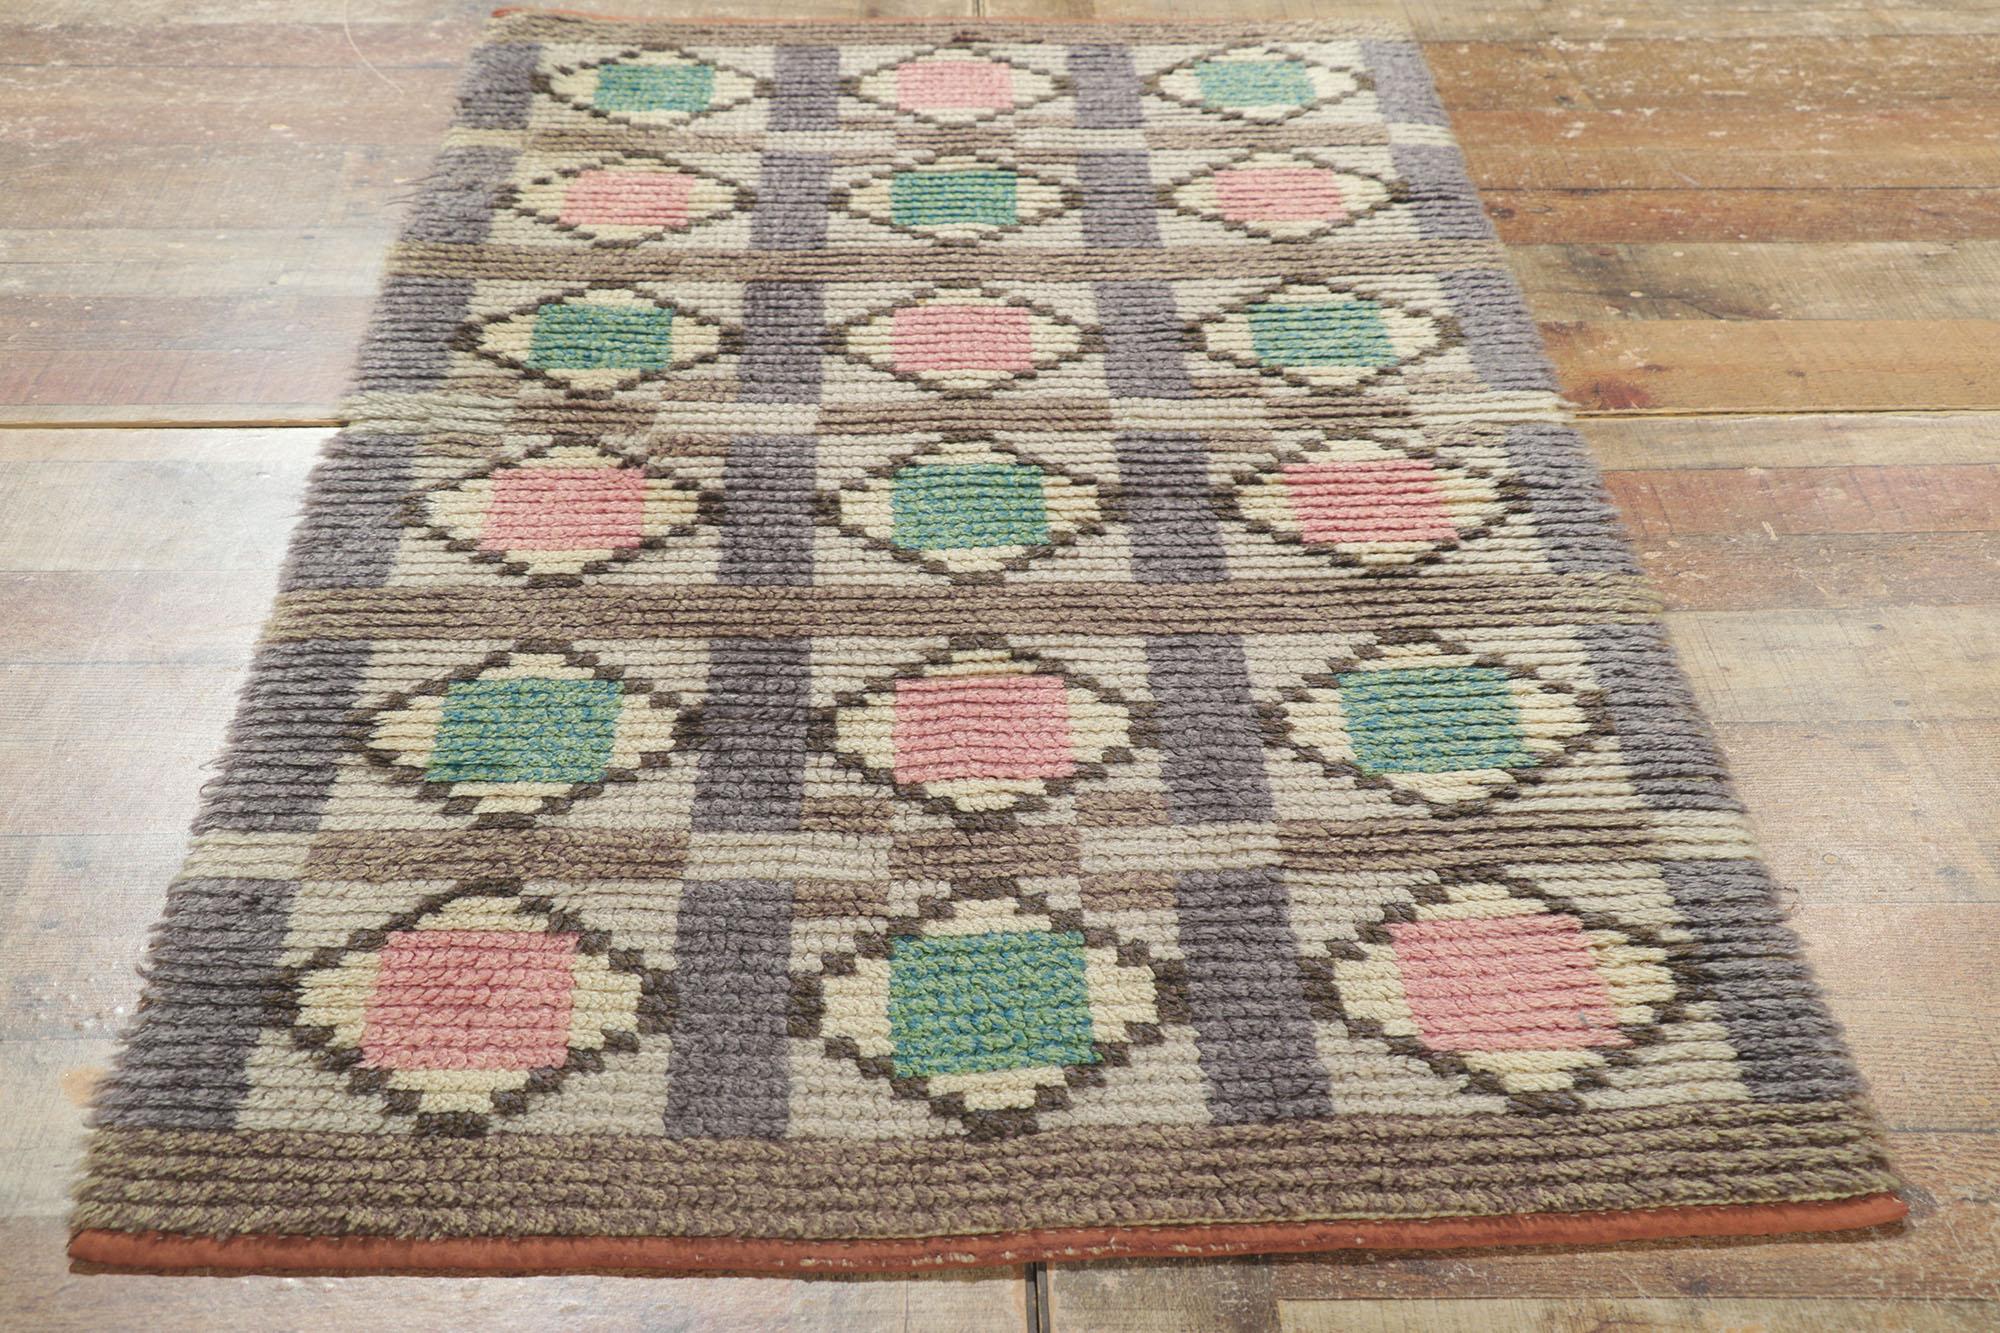 Vintage Finnish Ryijy Rya Rug with Scandinavian Modern Style For Sale 1